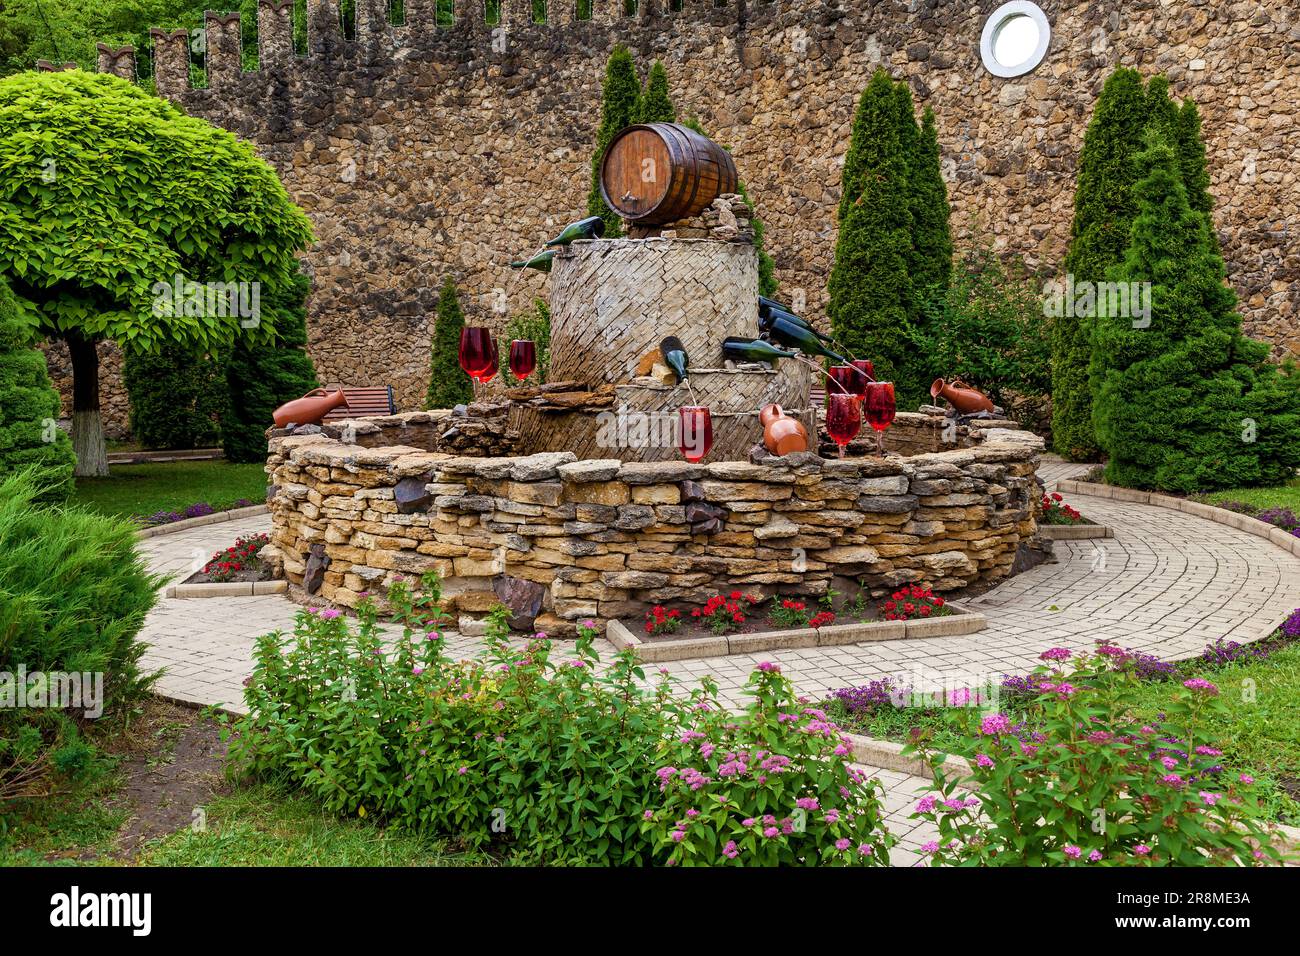 https://c8.alamy.com/comp/2R8ME3A/fountain-with-red-wine-pouring-from-bottles-into-glasses-2R8ME3A.jpg